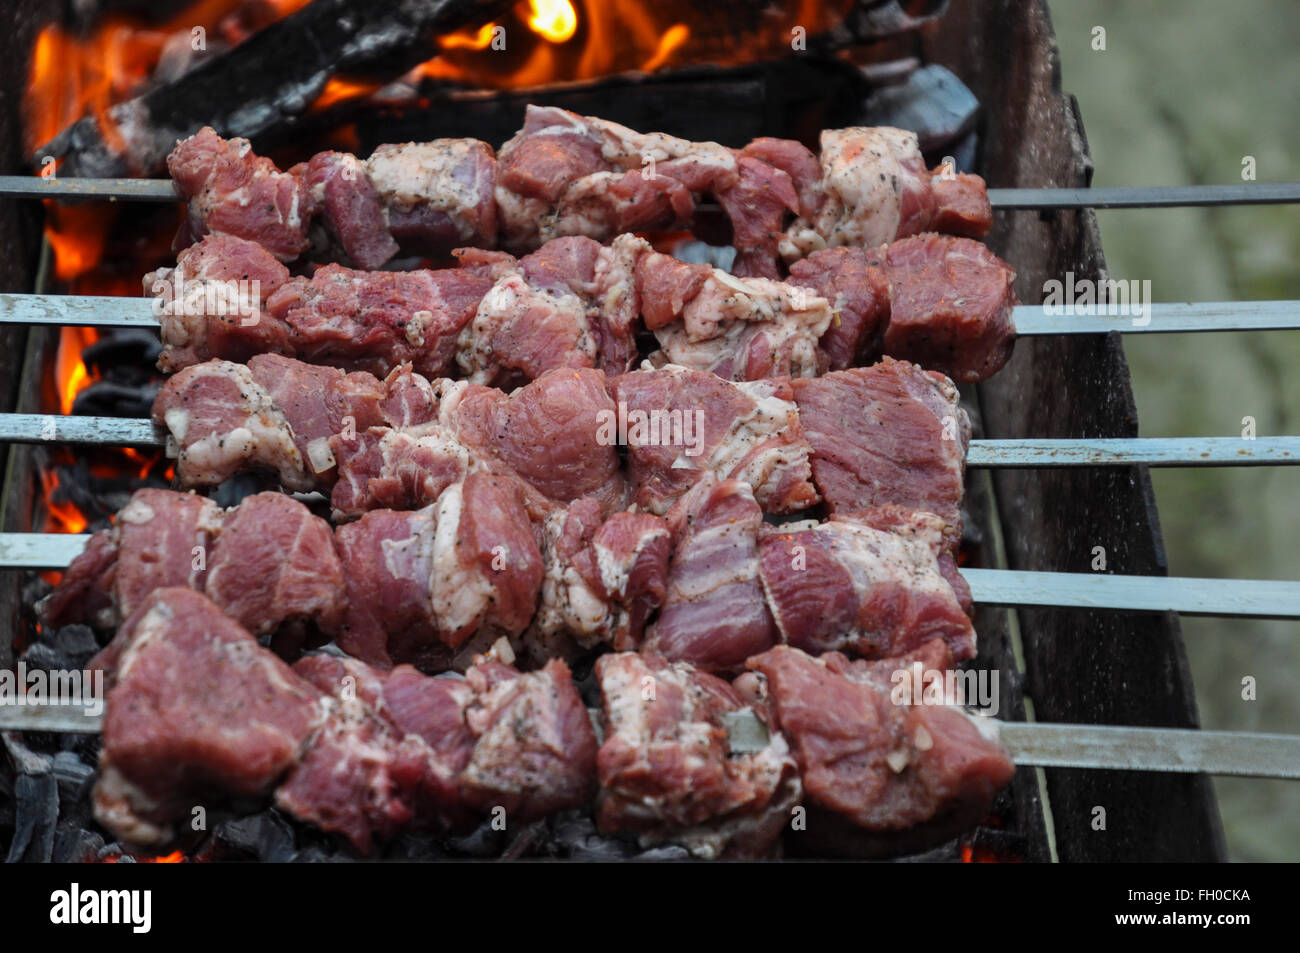 Marinated pieces of fresh meat for the barbecue Stock Photo